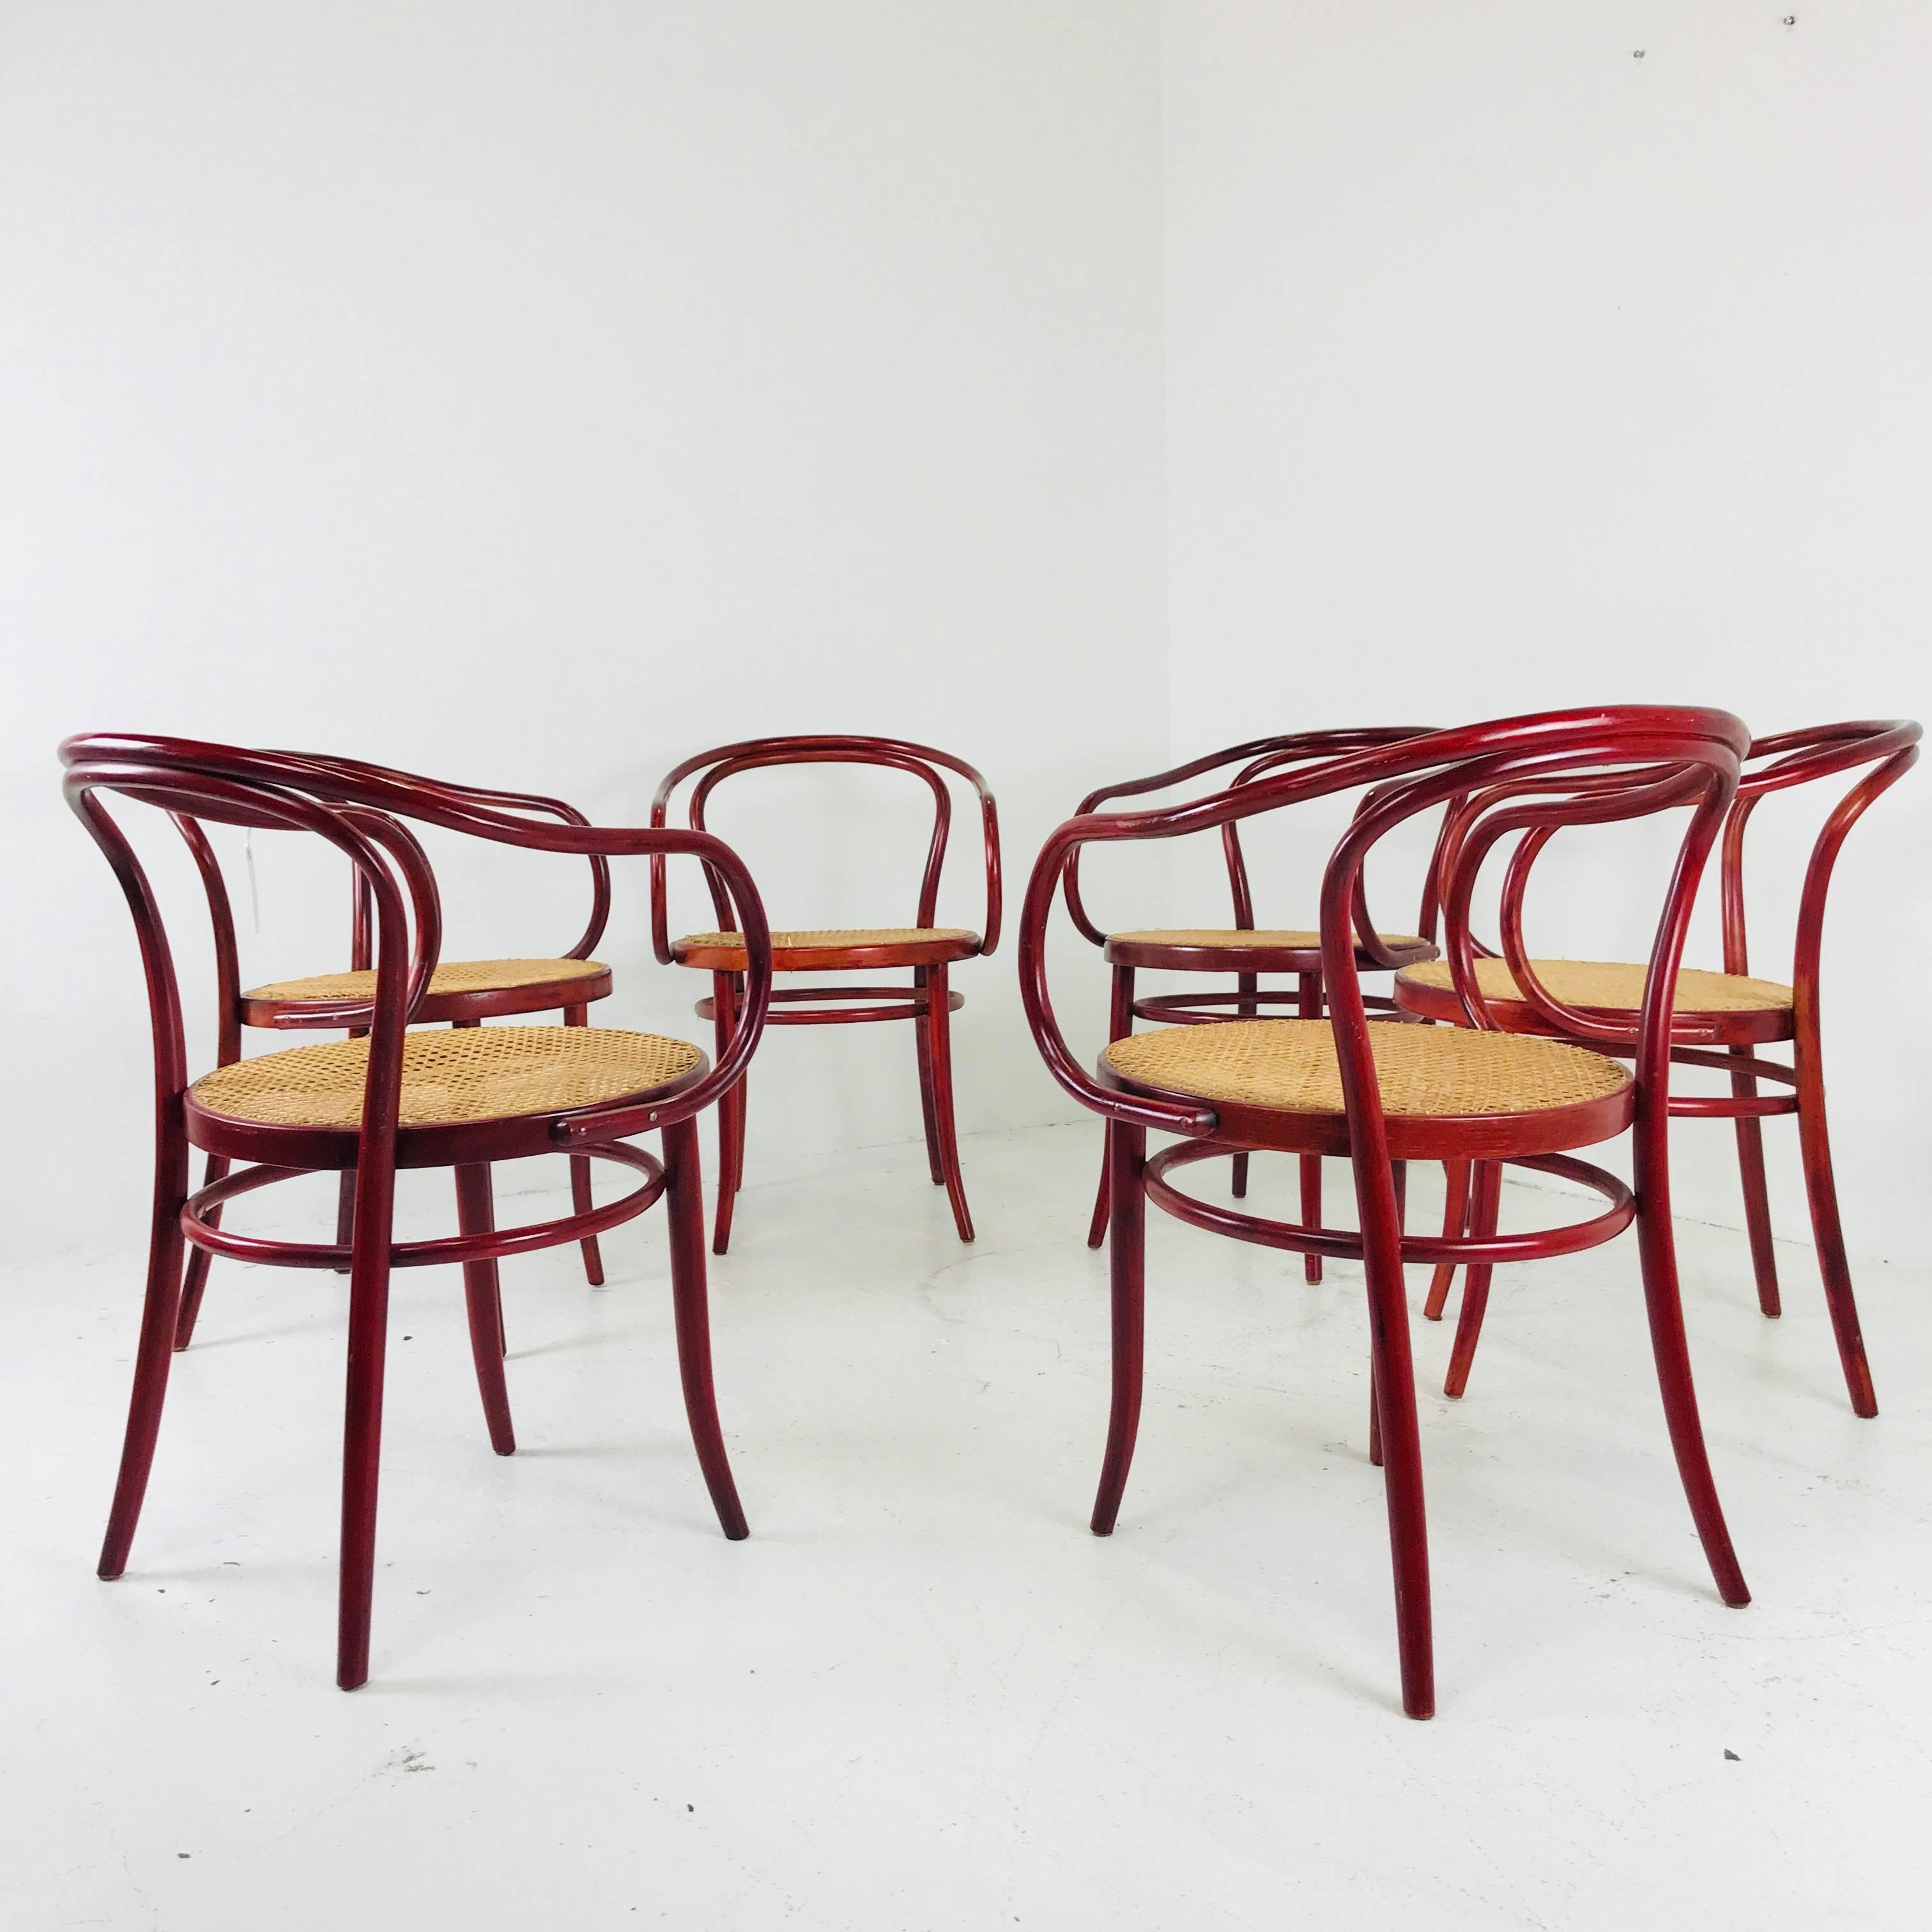 Set of six Thonet bentwood armchairs. In good vintage condition with visible wear due to use.
Refinishing is recommended.

Dimensions: 21.5